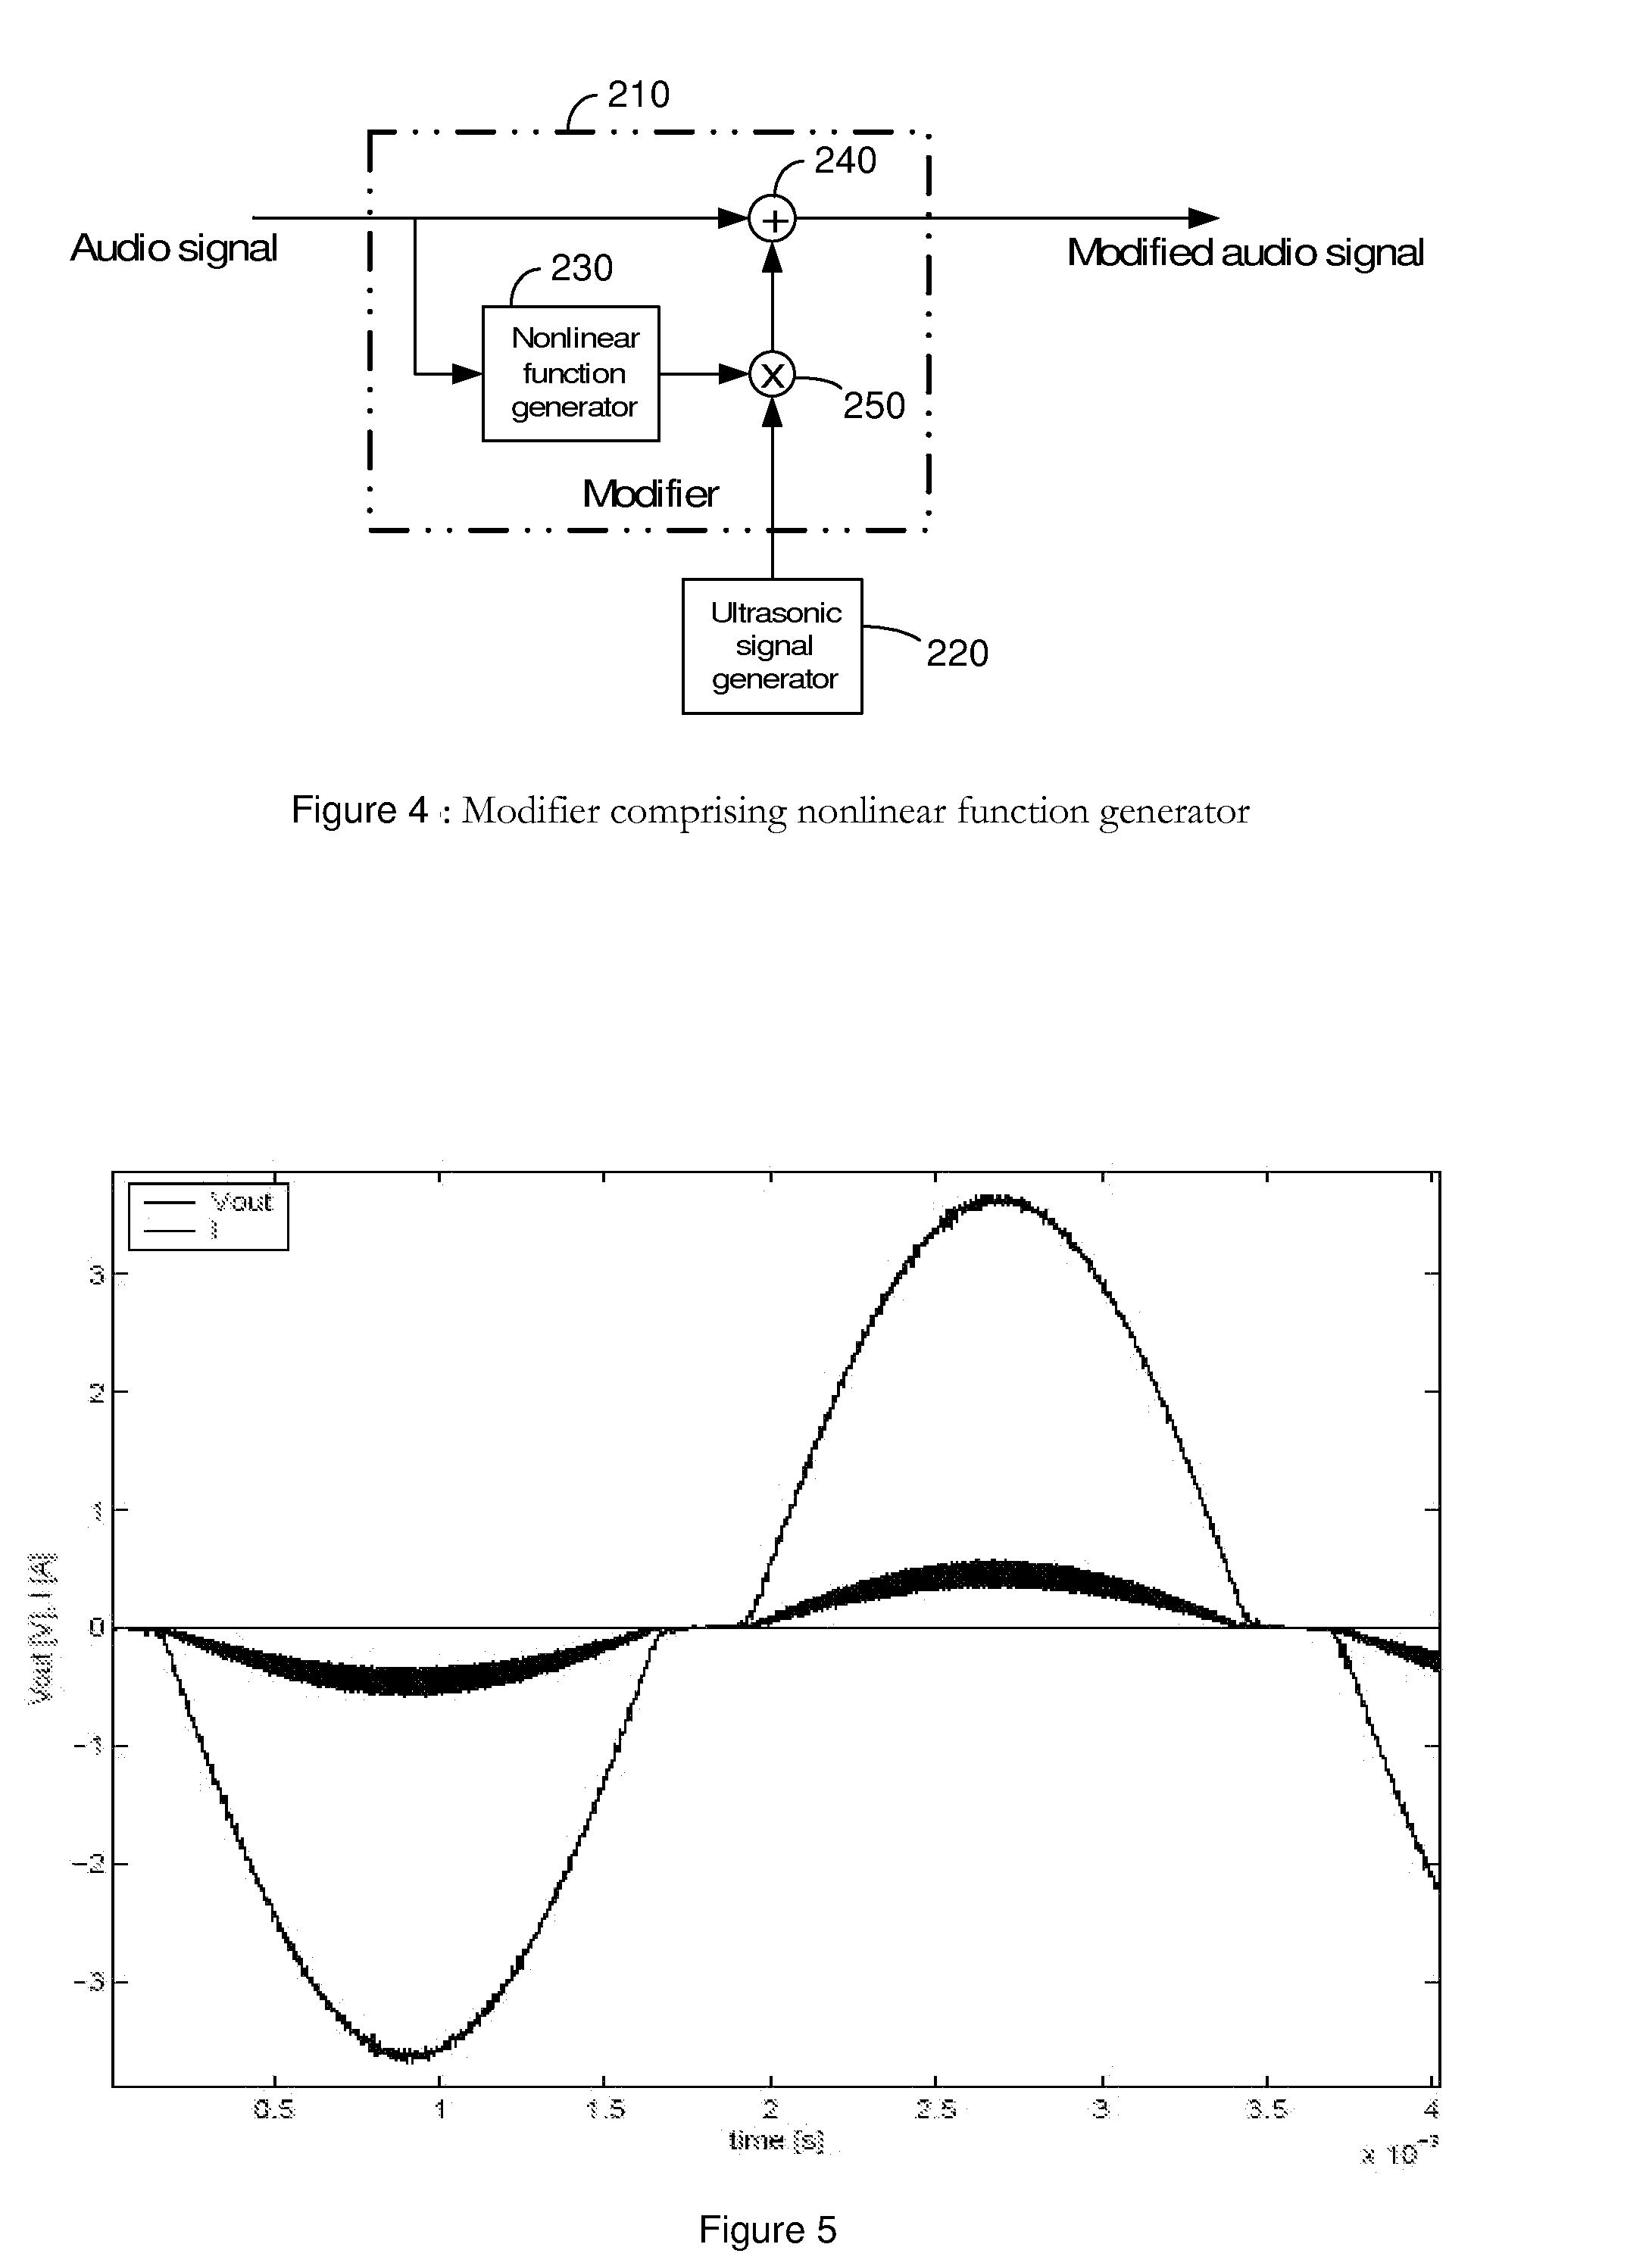 Systems and Methods for Improving Performance in a Digital Amplifier by Adding an Ultrasonic Signal to an Input Audio Signal